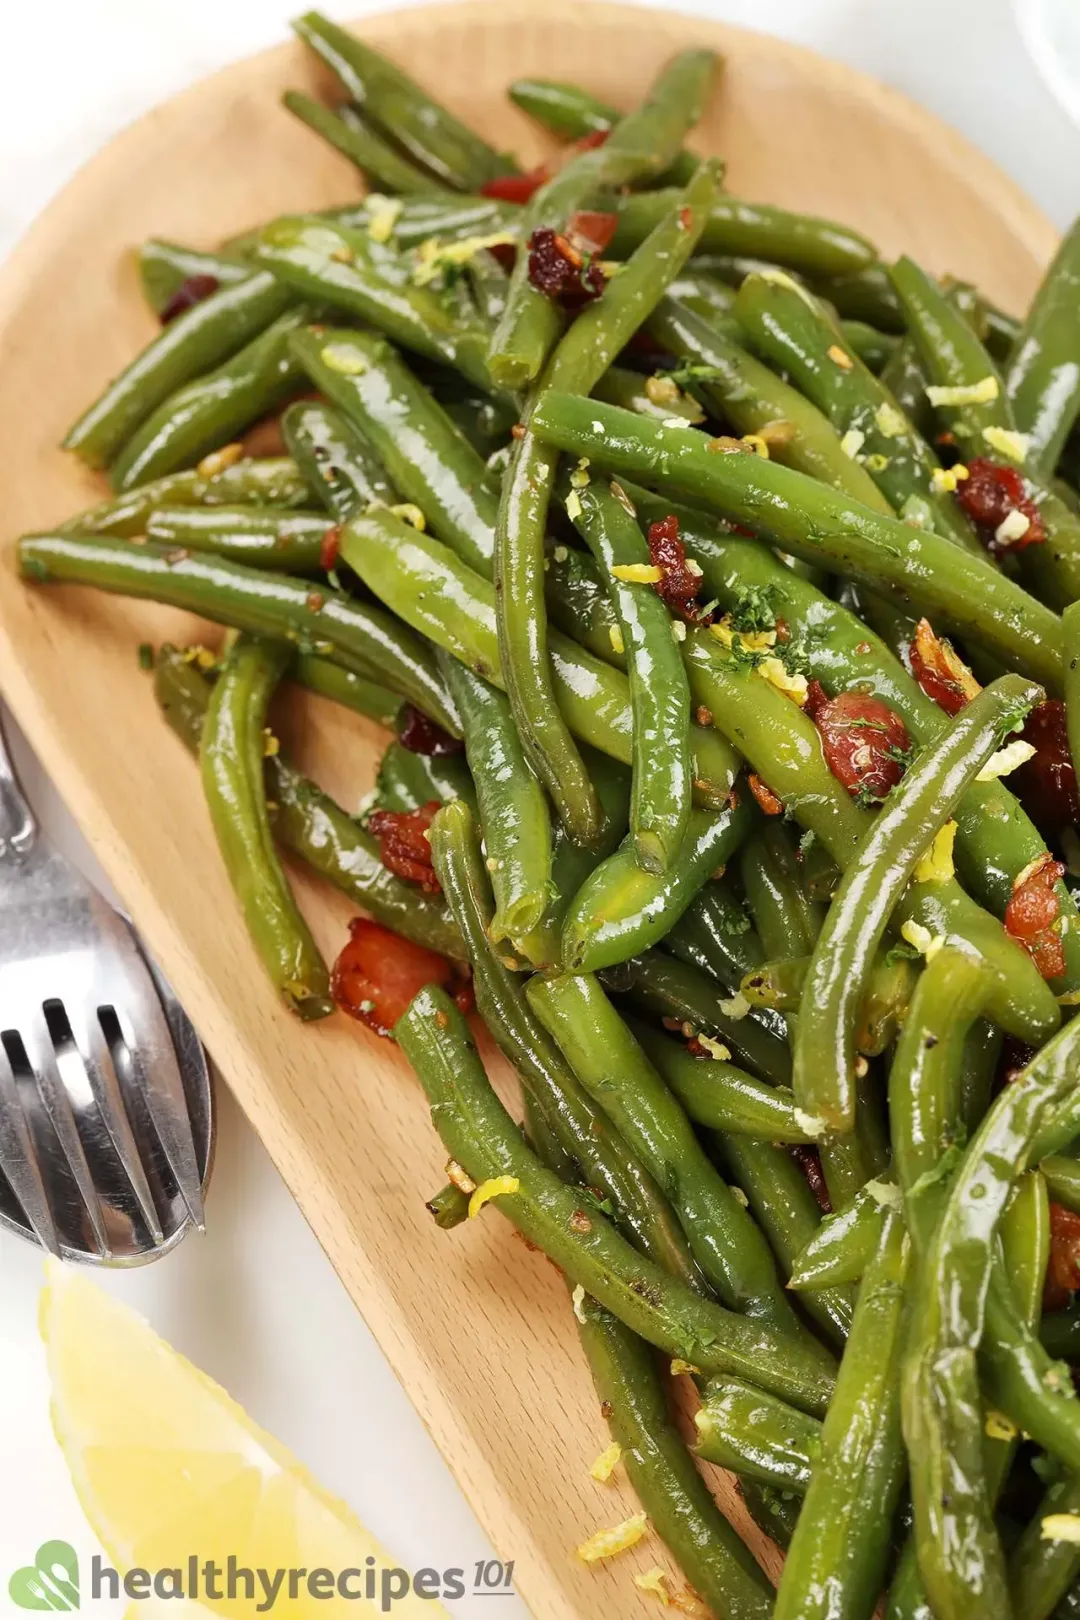 How to Season Instant Pot Green Beans